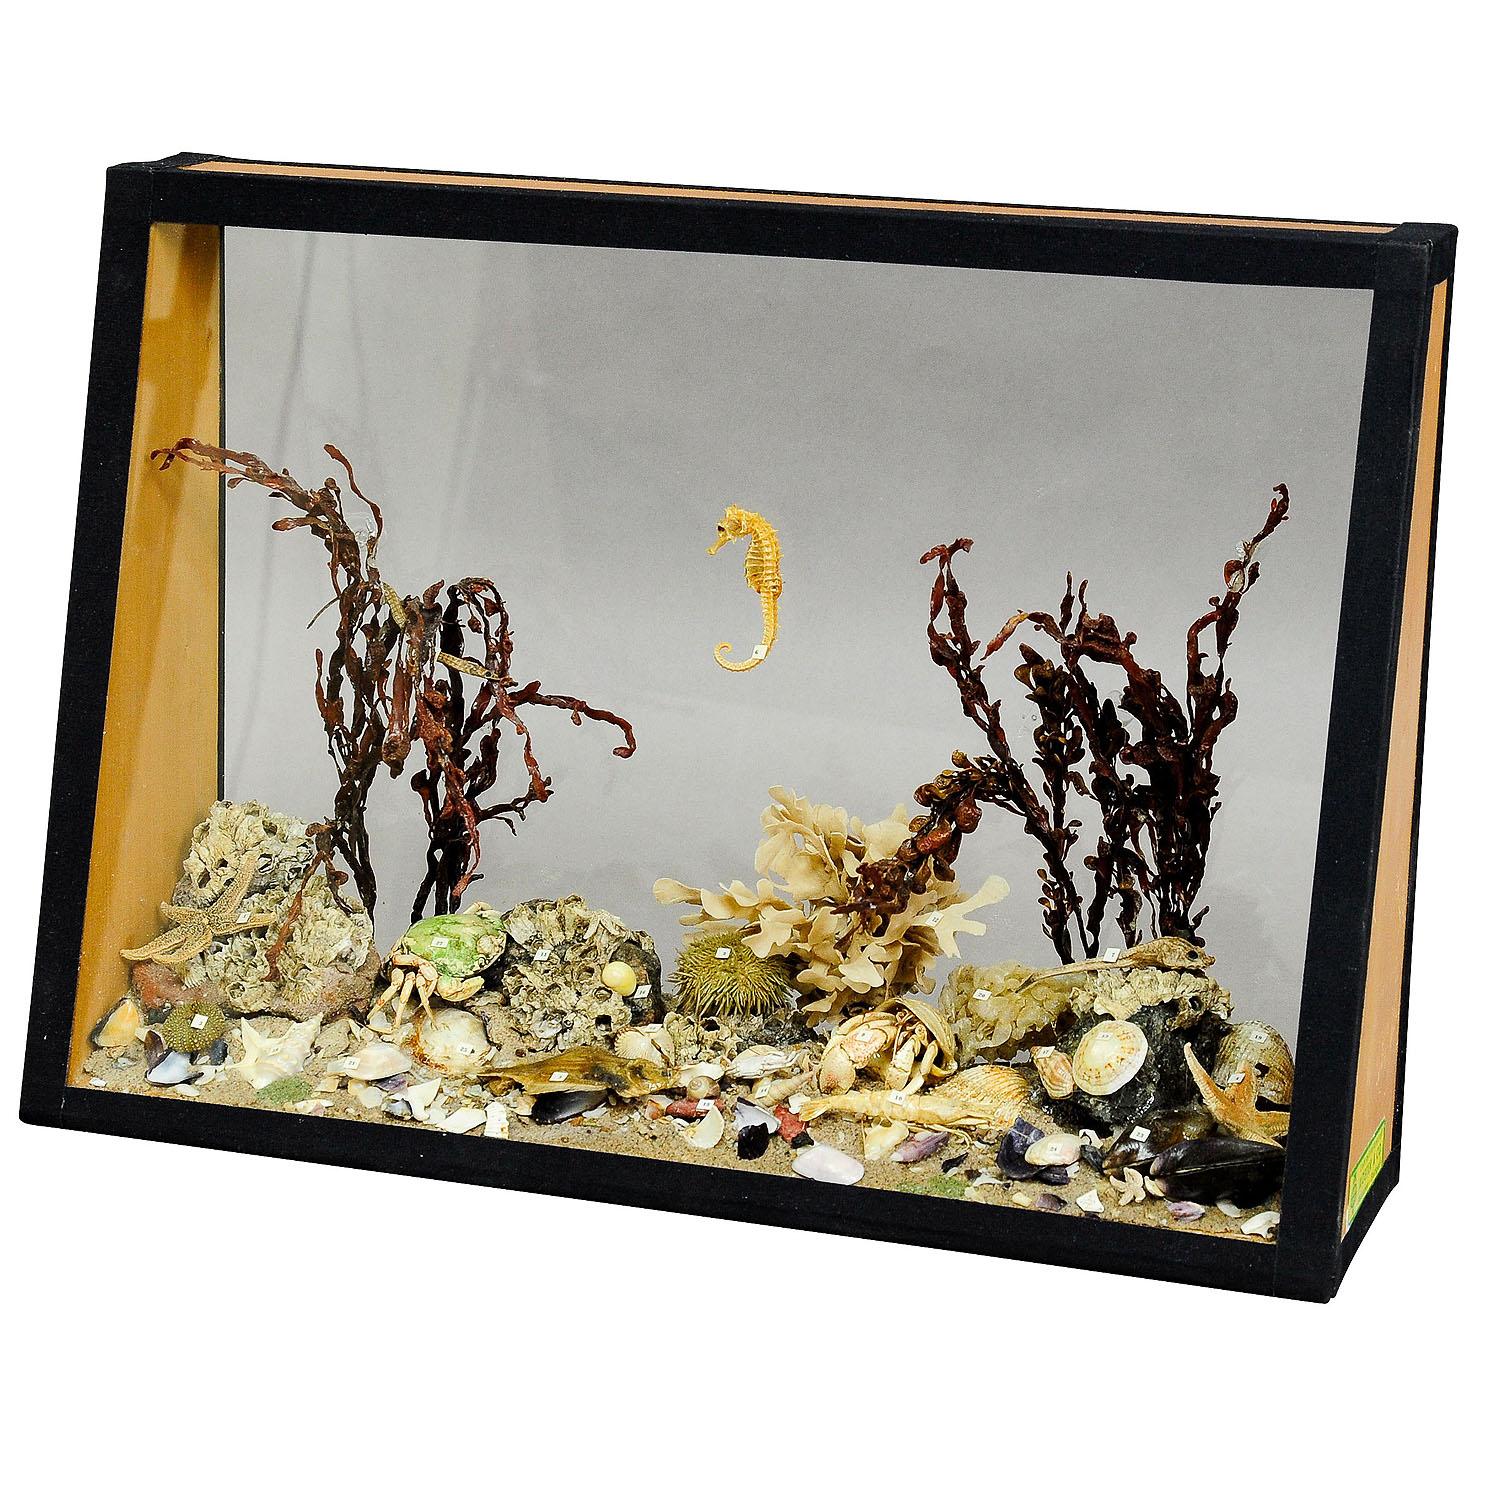 Antique under the water school specimen.

An antique natural wunderkammer glass display with marine life in the depths of the sea. The specimen is set up like an aquarium with sea stars, sea urchin, fishes, prawn, crustaceans, plants, stones ..... .